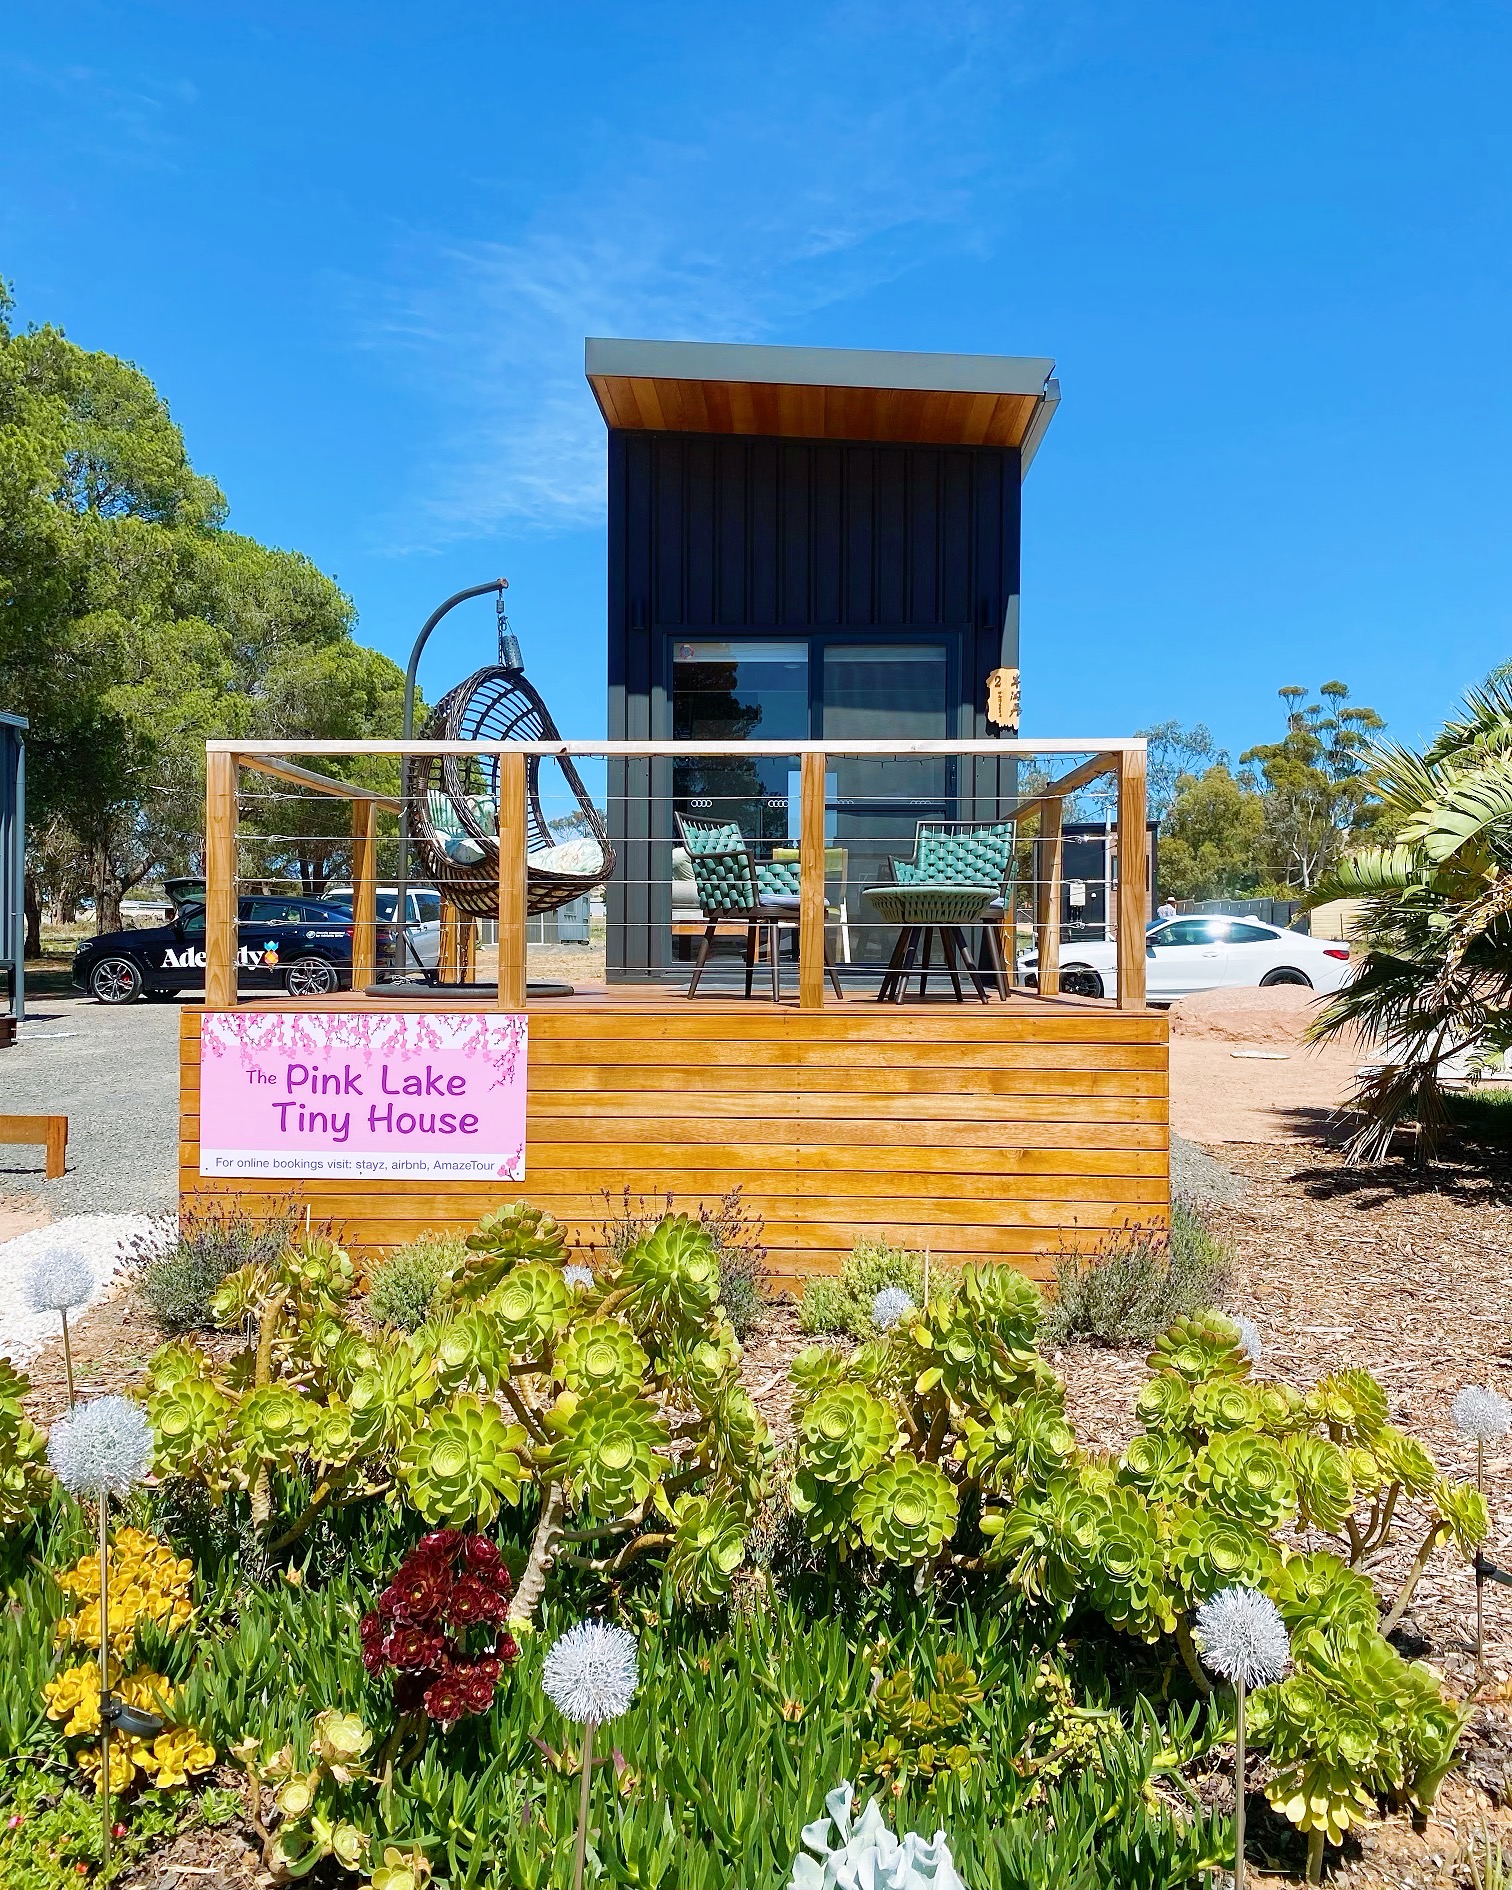 WIN a night’s accommodation at the Pink Lake Tiny House!